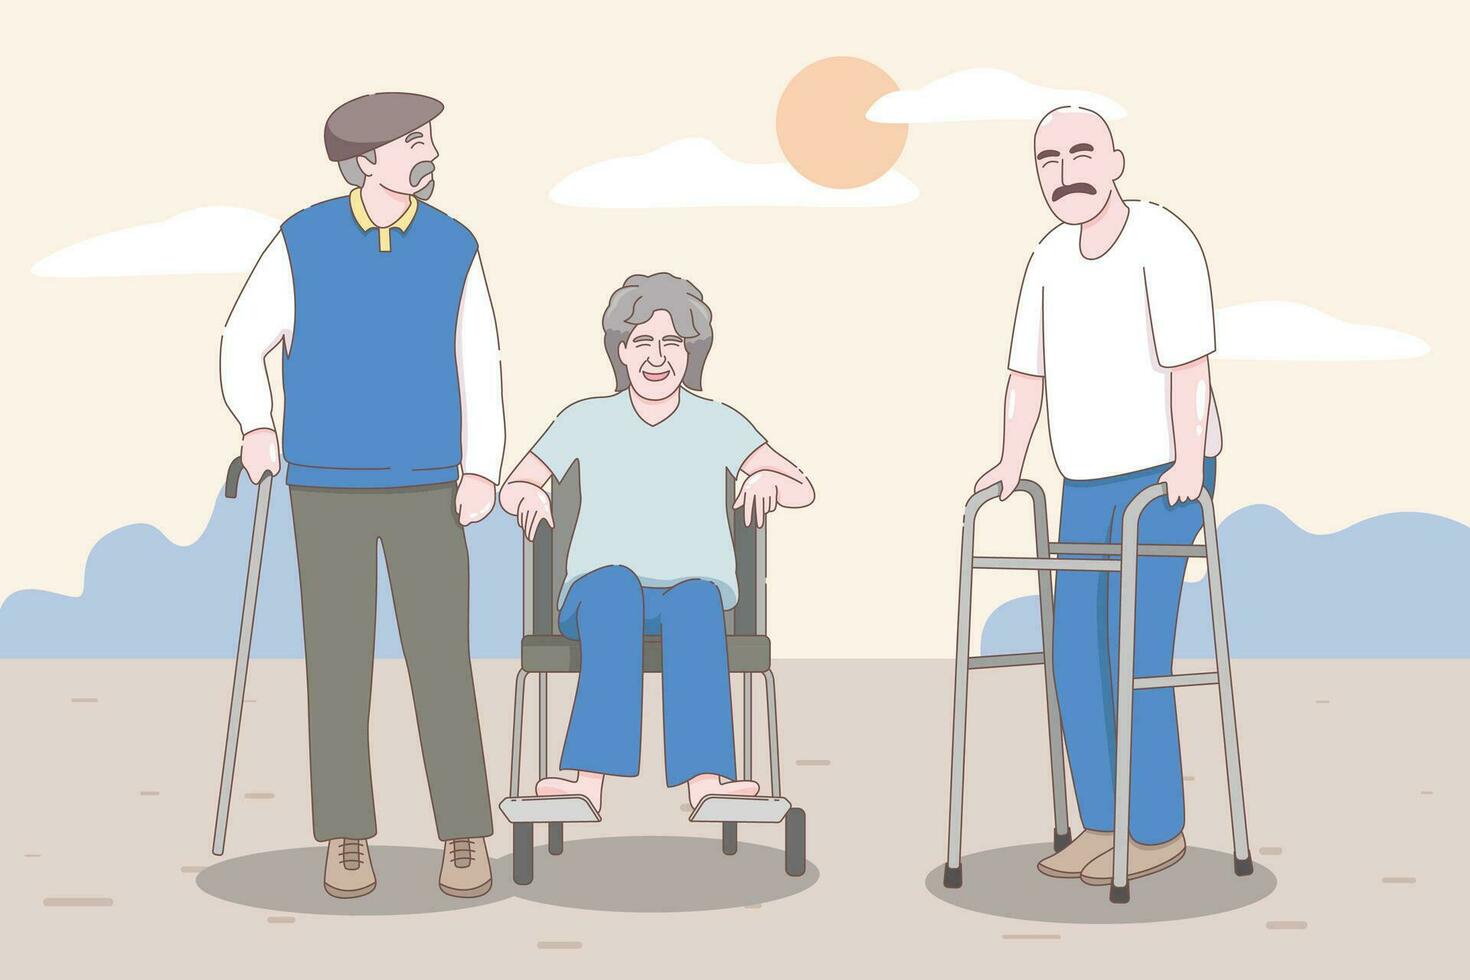 elderly care, old people care activities, prescribes treatment. Vector characters flat cartoon.